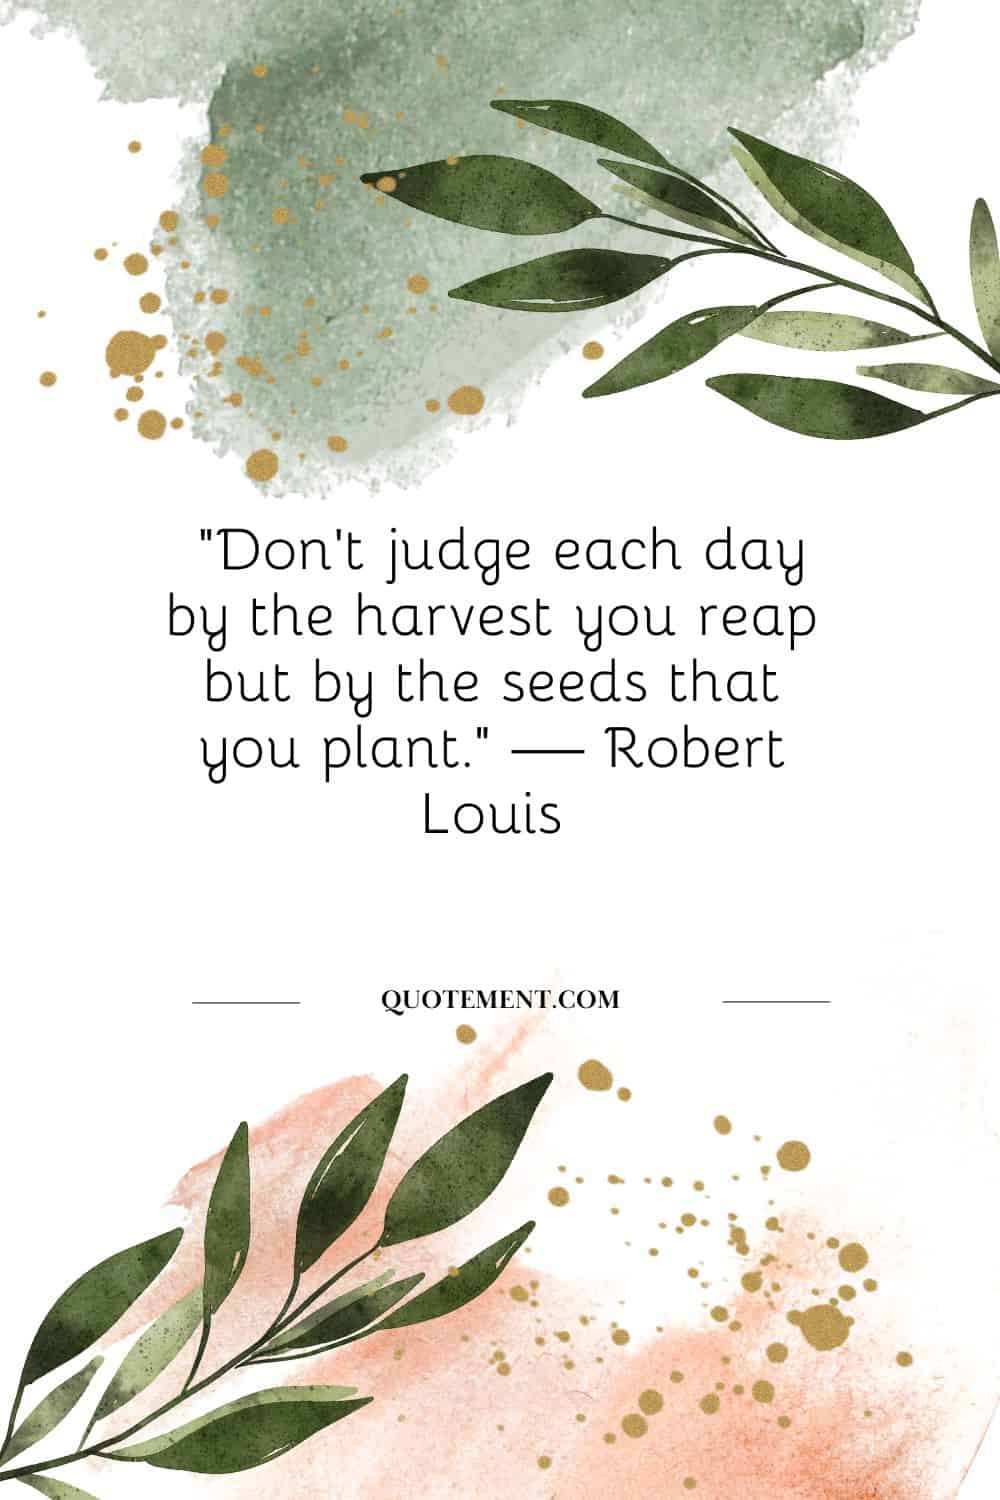 “Don’t judge each day by the harvest you reap but by the seeds that you plant.” — Robert Louis